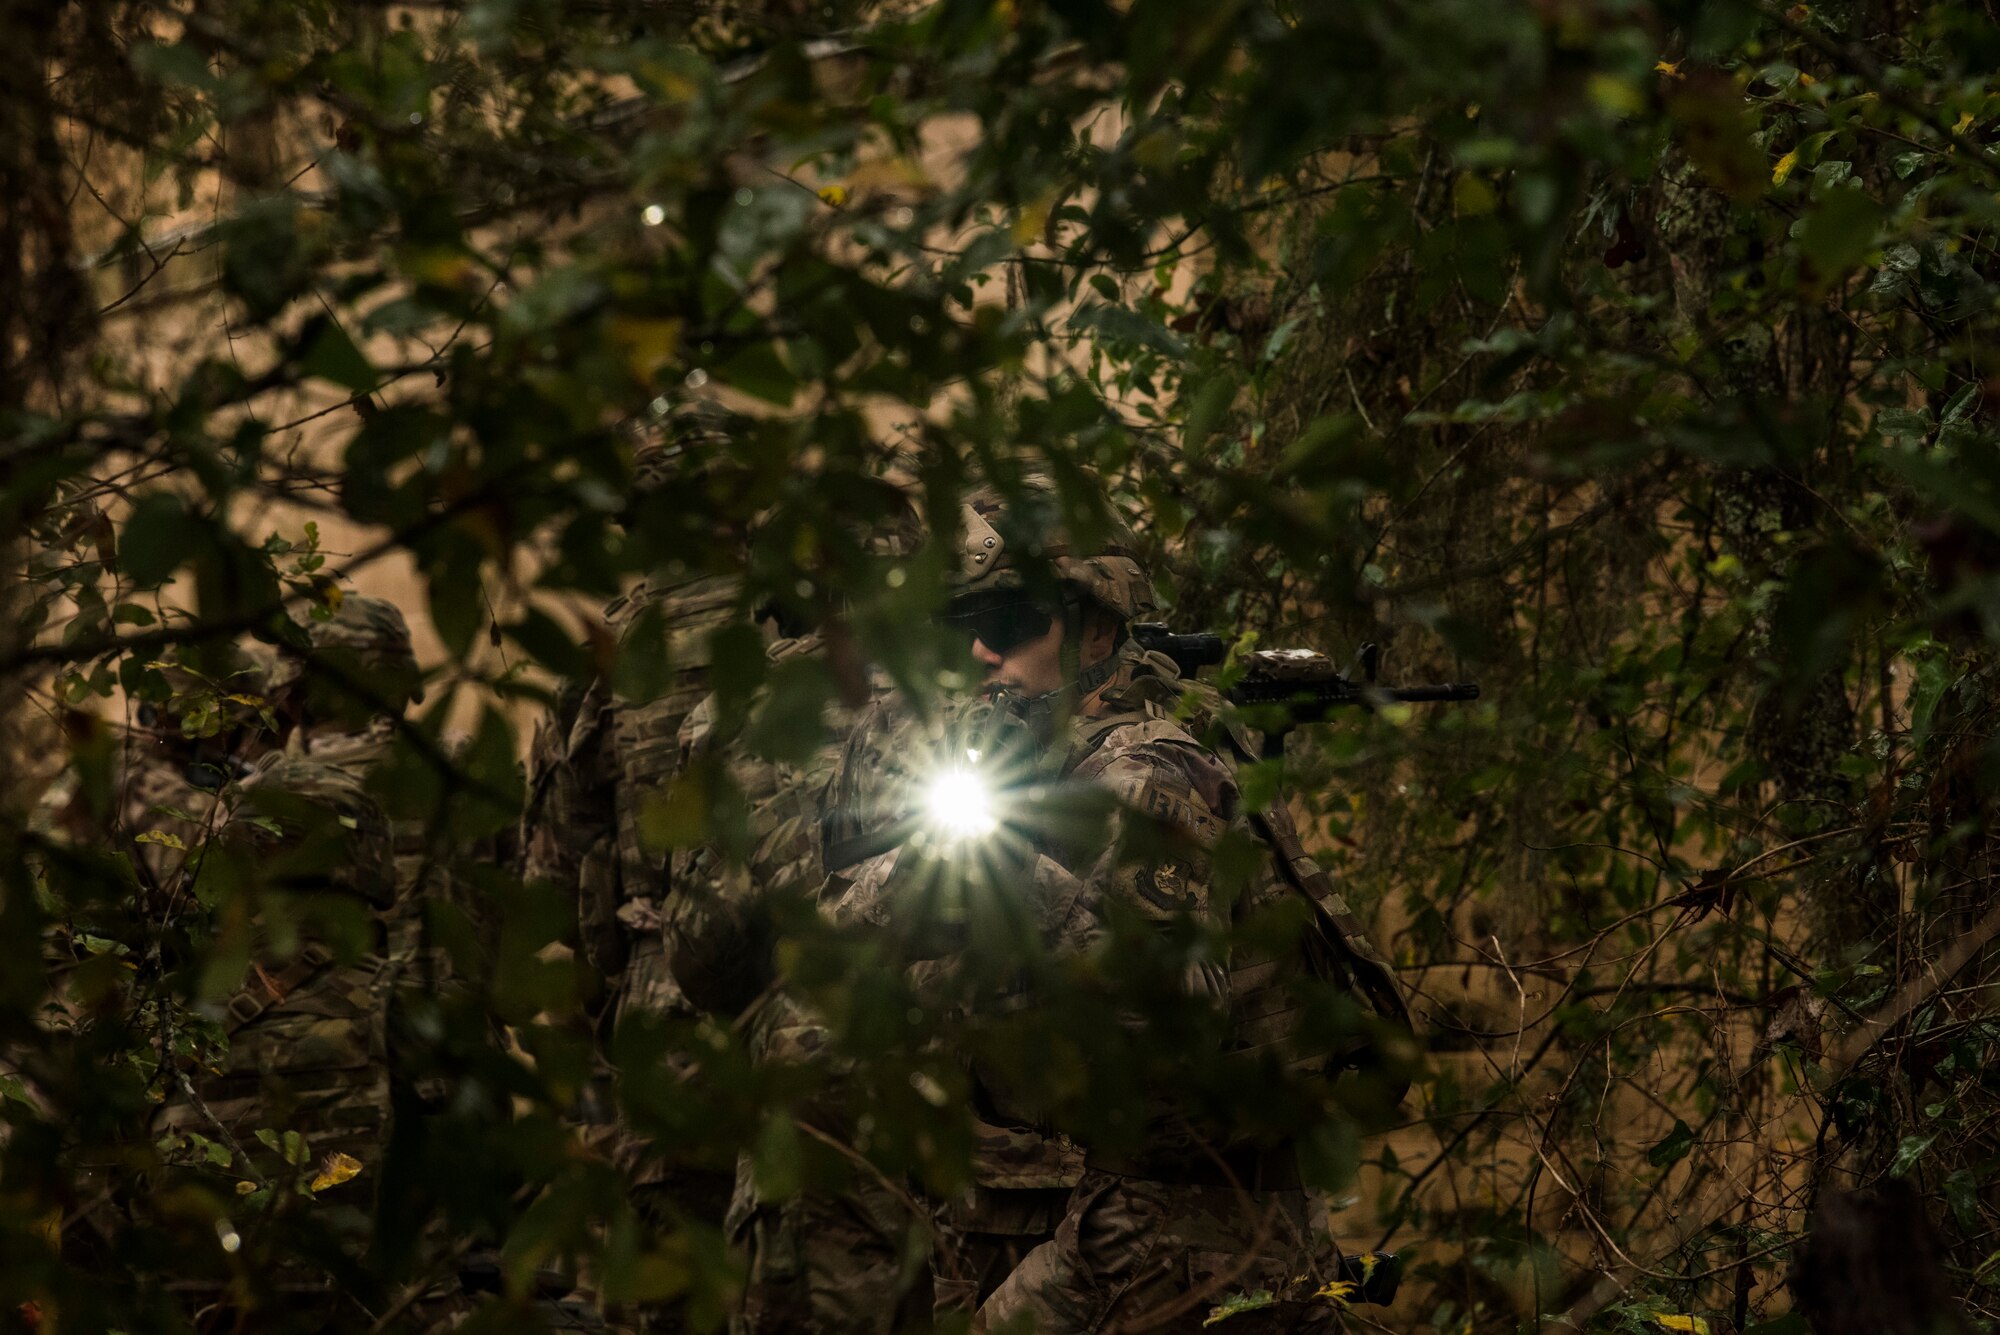 A member of the 823rd Base Defense Squadron shines a light, mounted to an M4 carbine, while tactically moving through dense brush during a training scenario, Moody Air Force Base, Jan. 12, 2018. The 823rd is one of three operational security forces squadrons under the 820th Base Defense Group whose mission is to provide high-risk force protection and integrated base defense for expeditionary forces. (U.S. Air Force photo by Bennie J. Davis III)